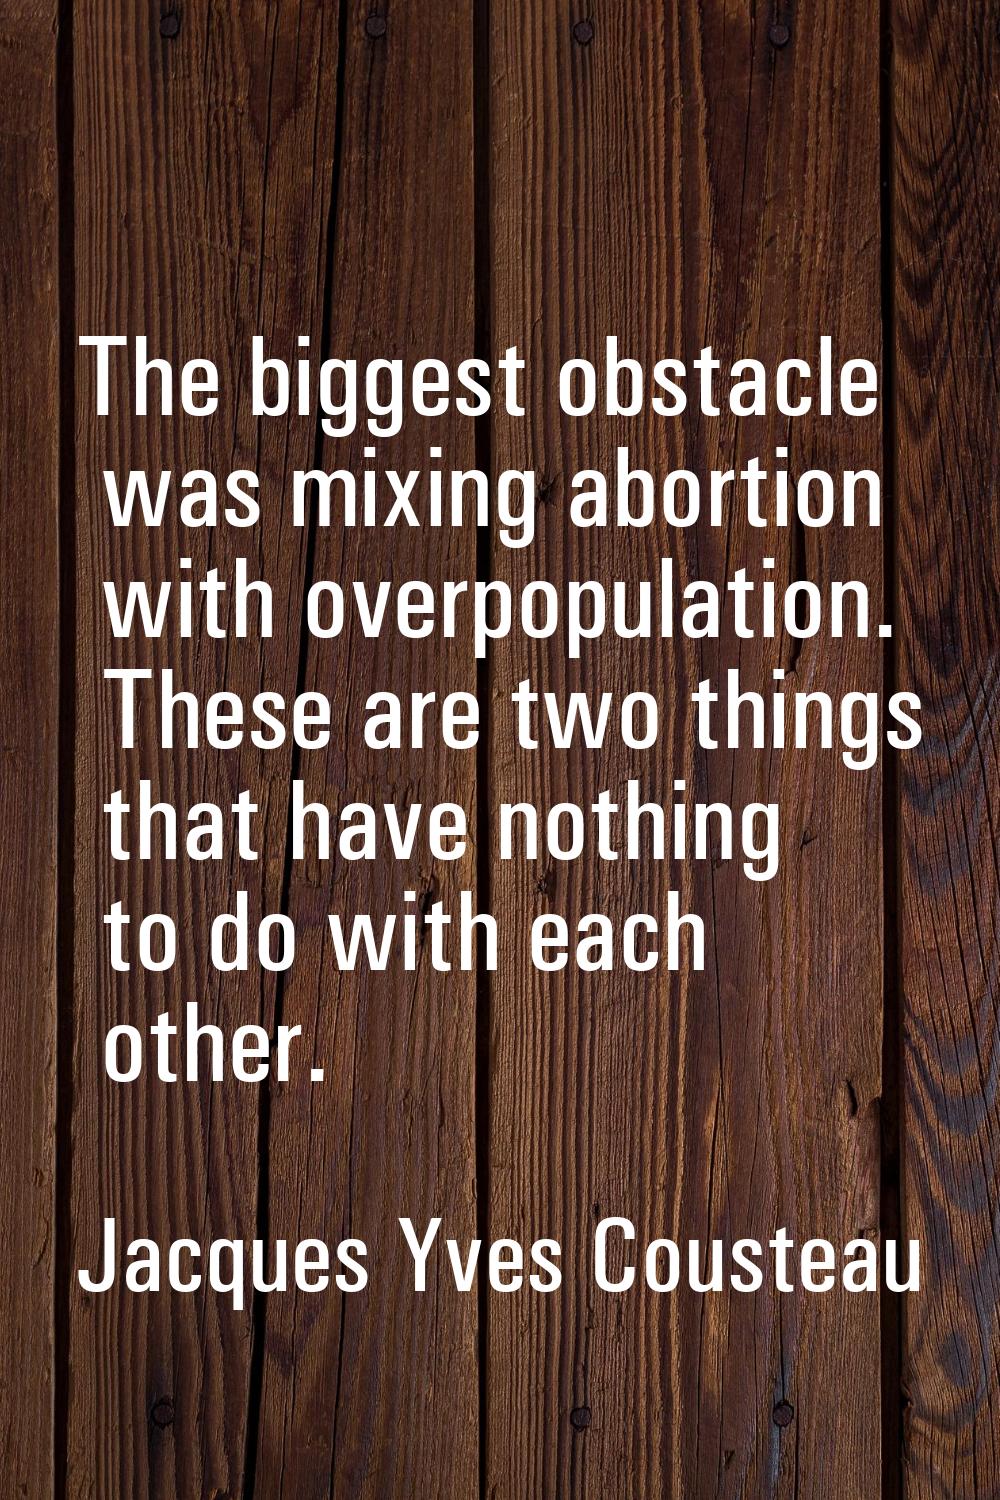 The biggest obstacle was mixing abortion with overpopulation. These are two things that have nothin